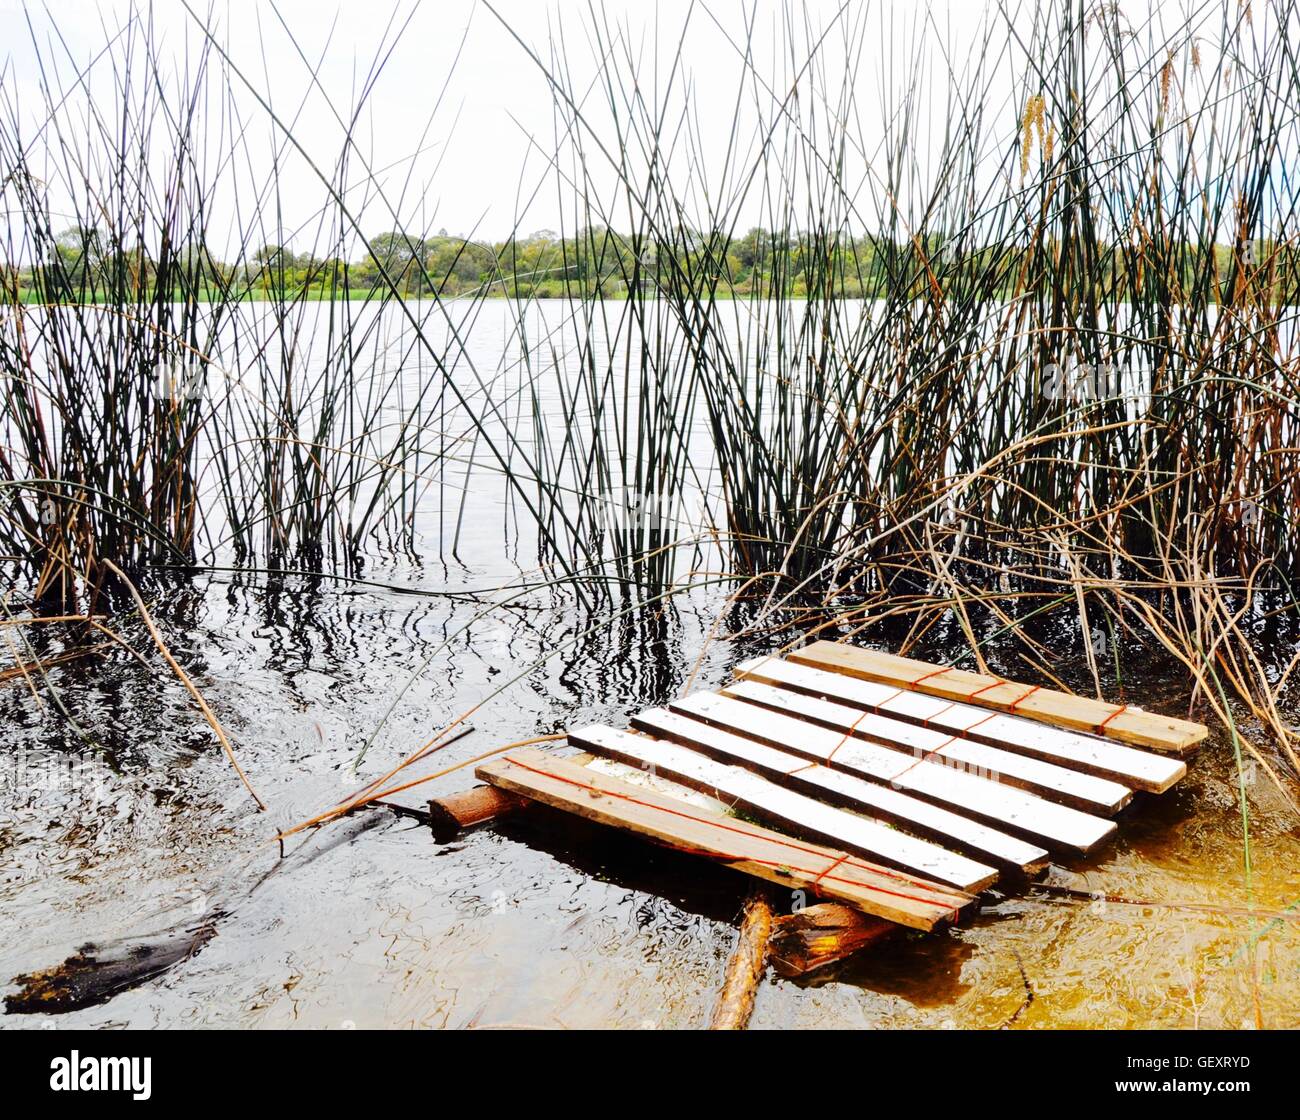 Industrial wooden painted pallet floating with the tall grasses in the wetland at Bibra Lake in Western Australia. Stock Photo